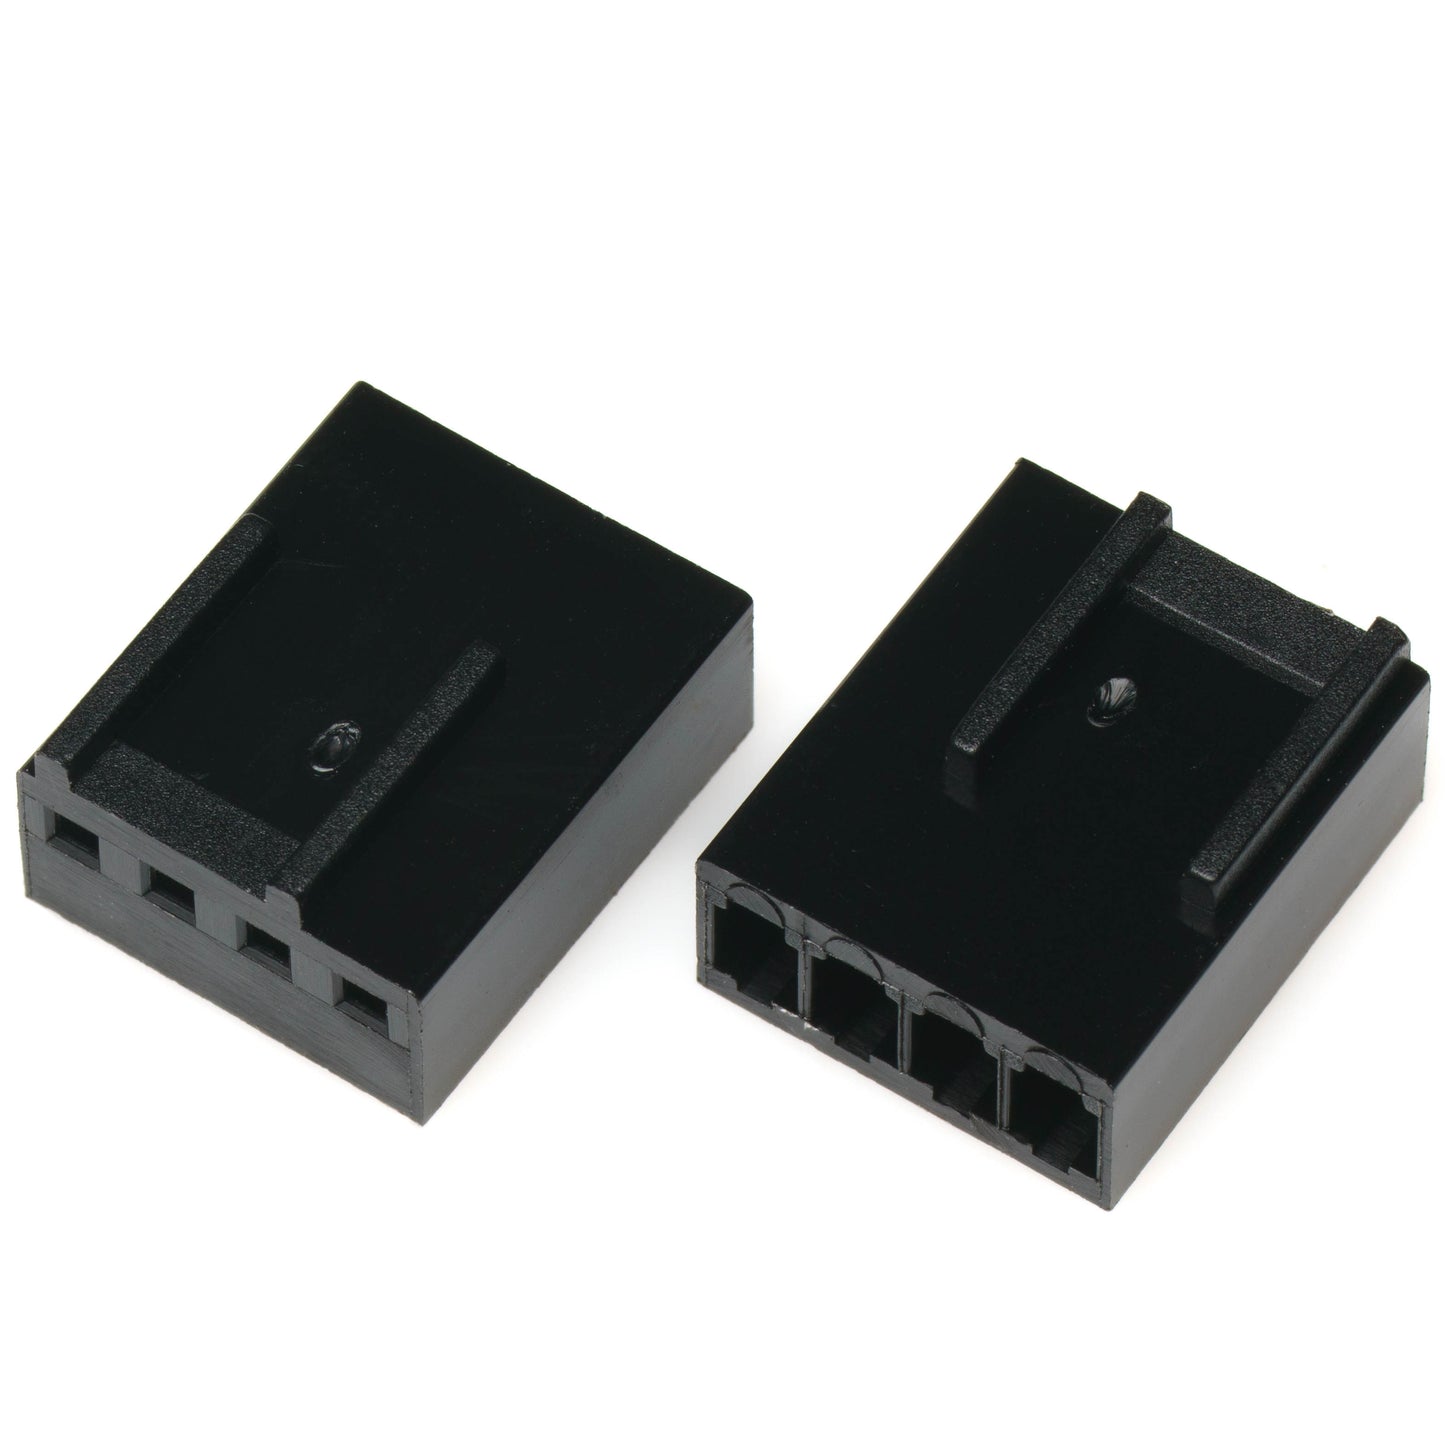 Female 4-Pin PWM Fan Connector Kit - 10 Pack